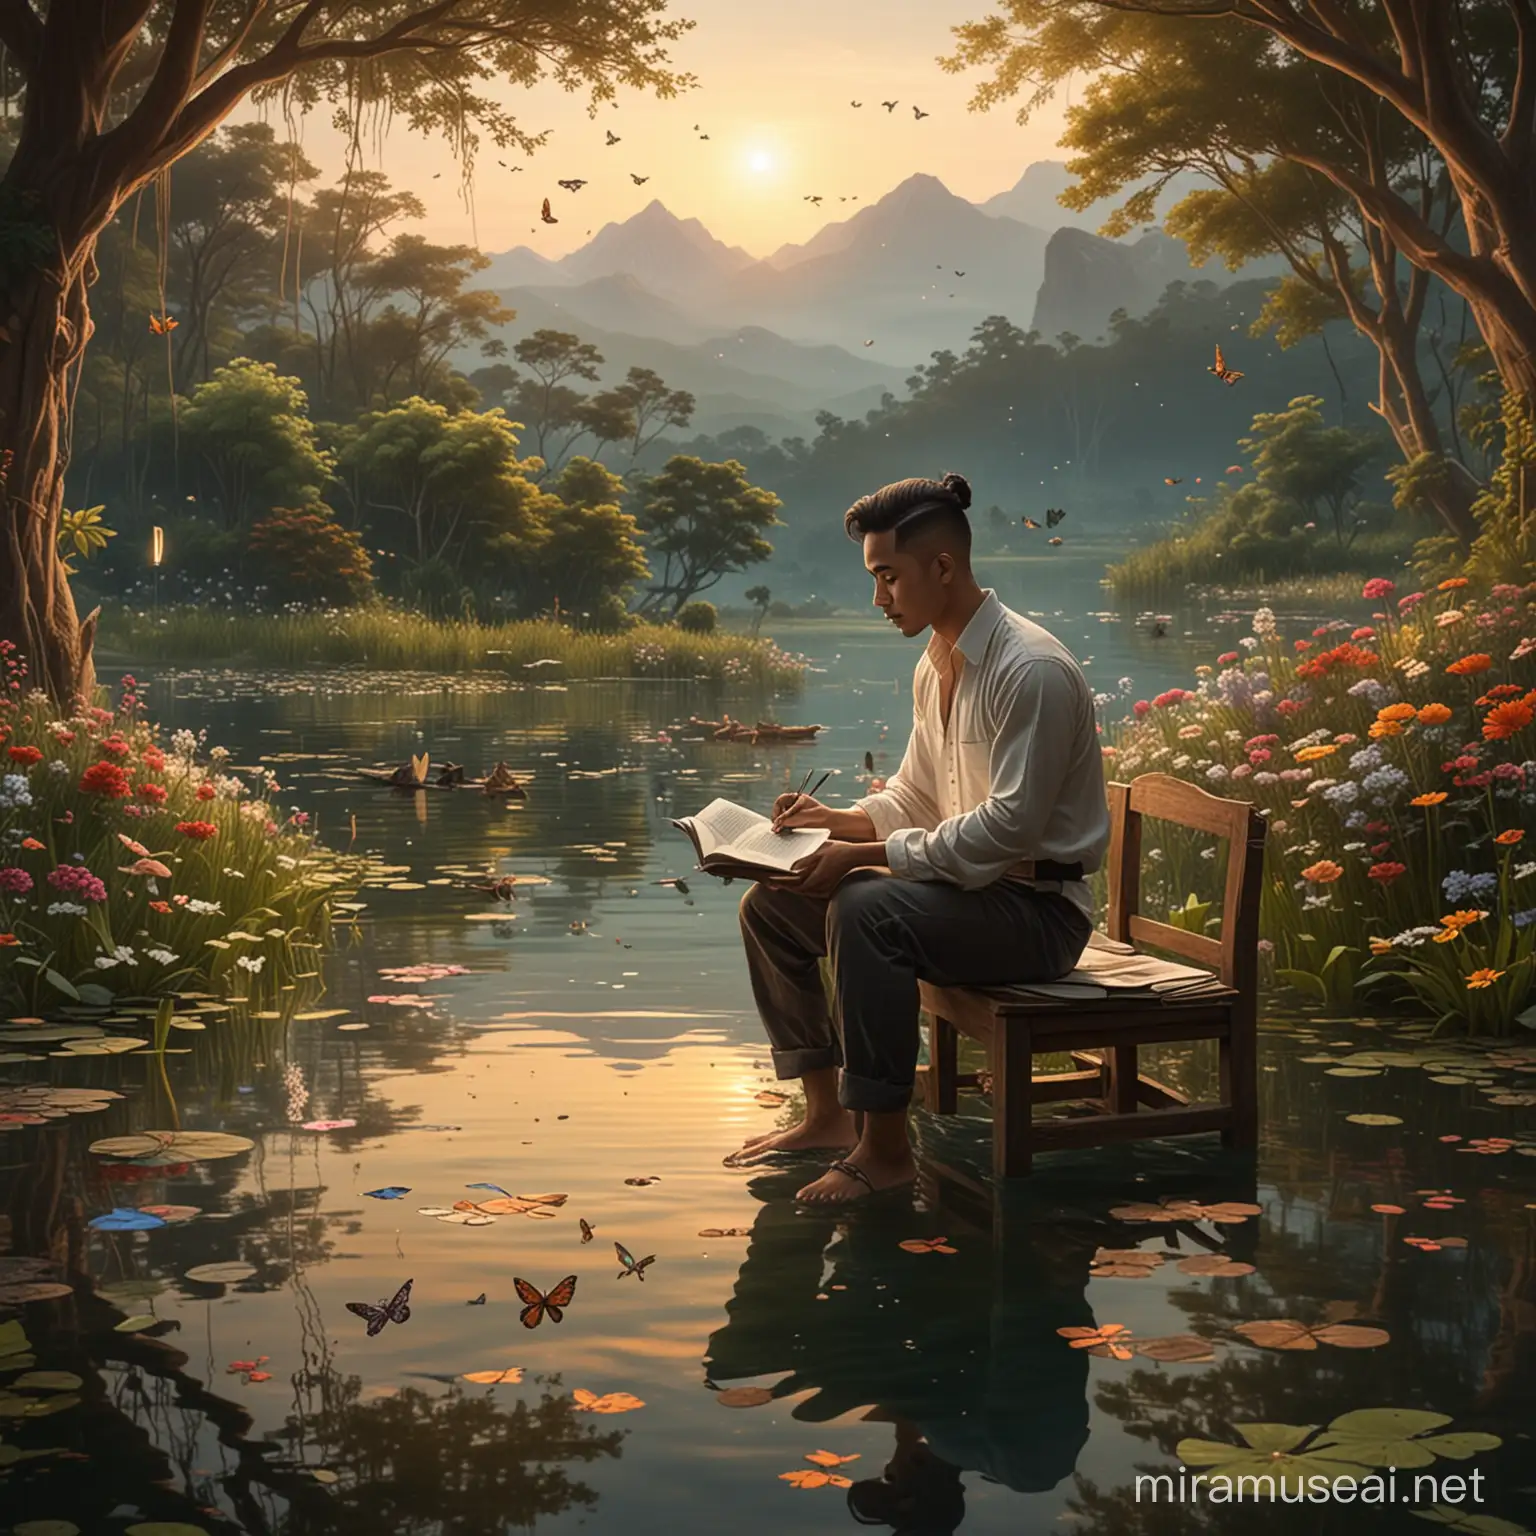 Indonesian Man Reading Book Surrounded by Natures Splendor